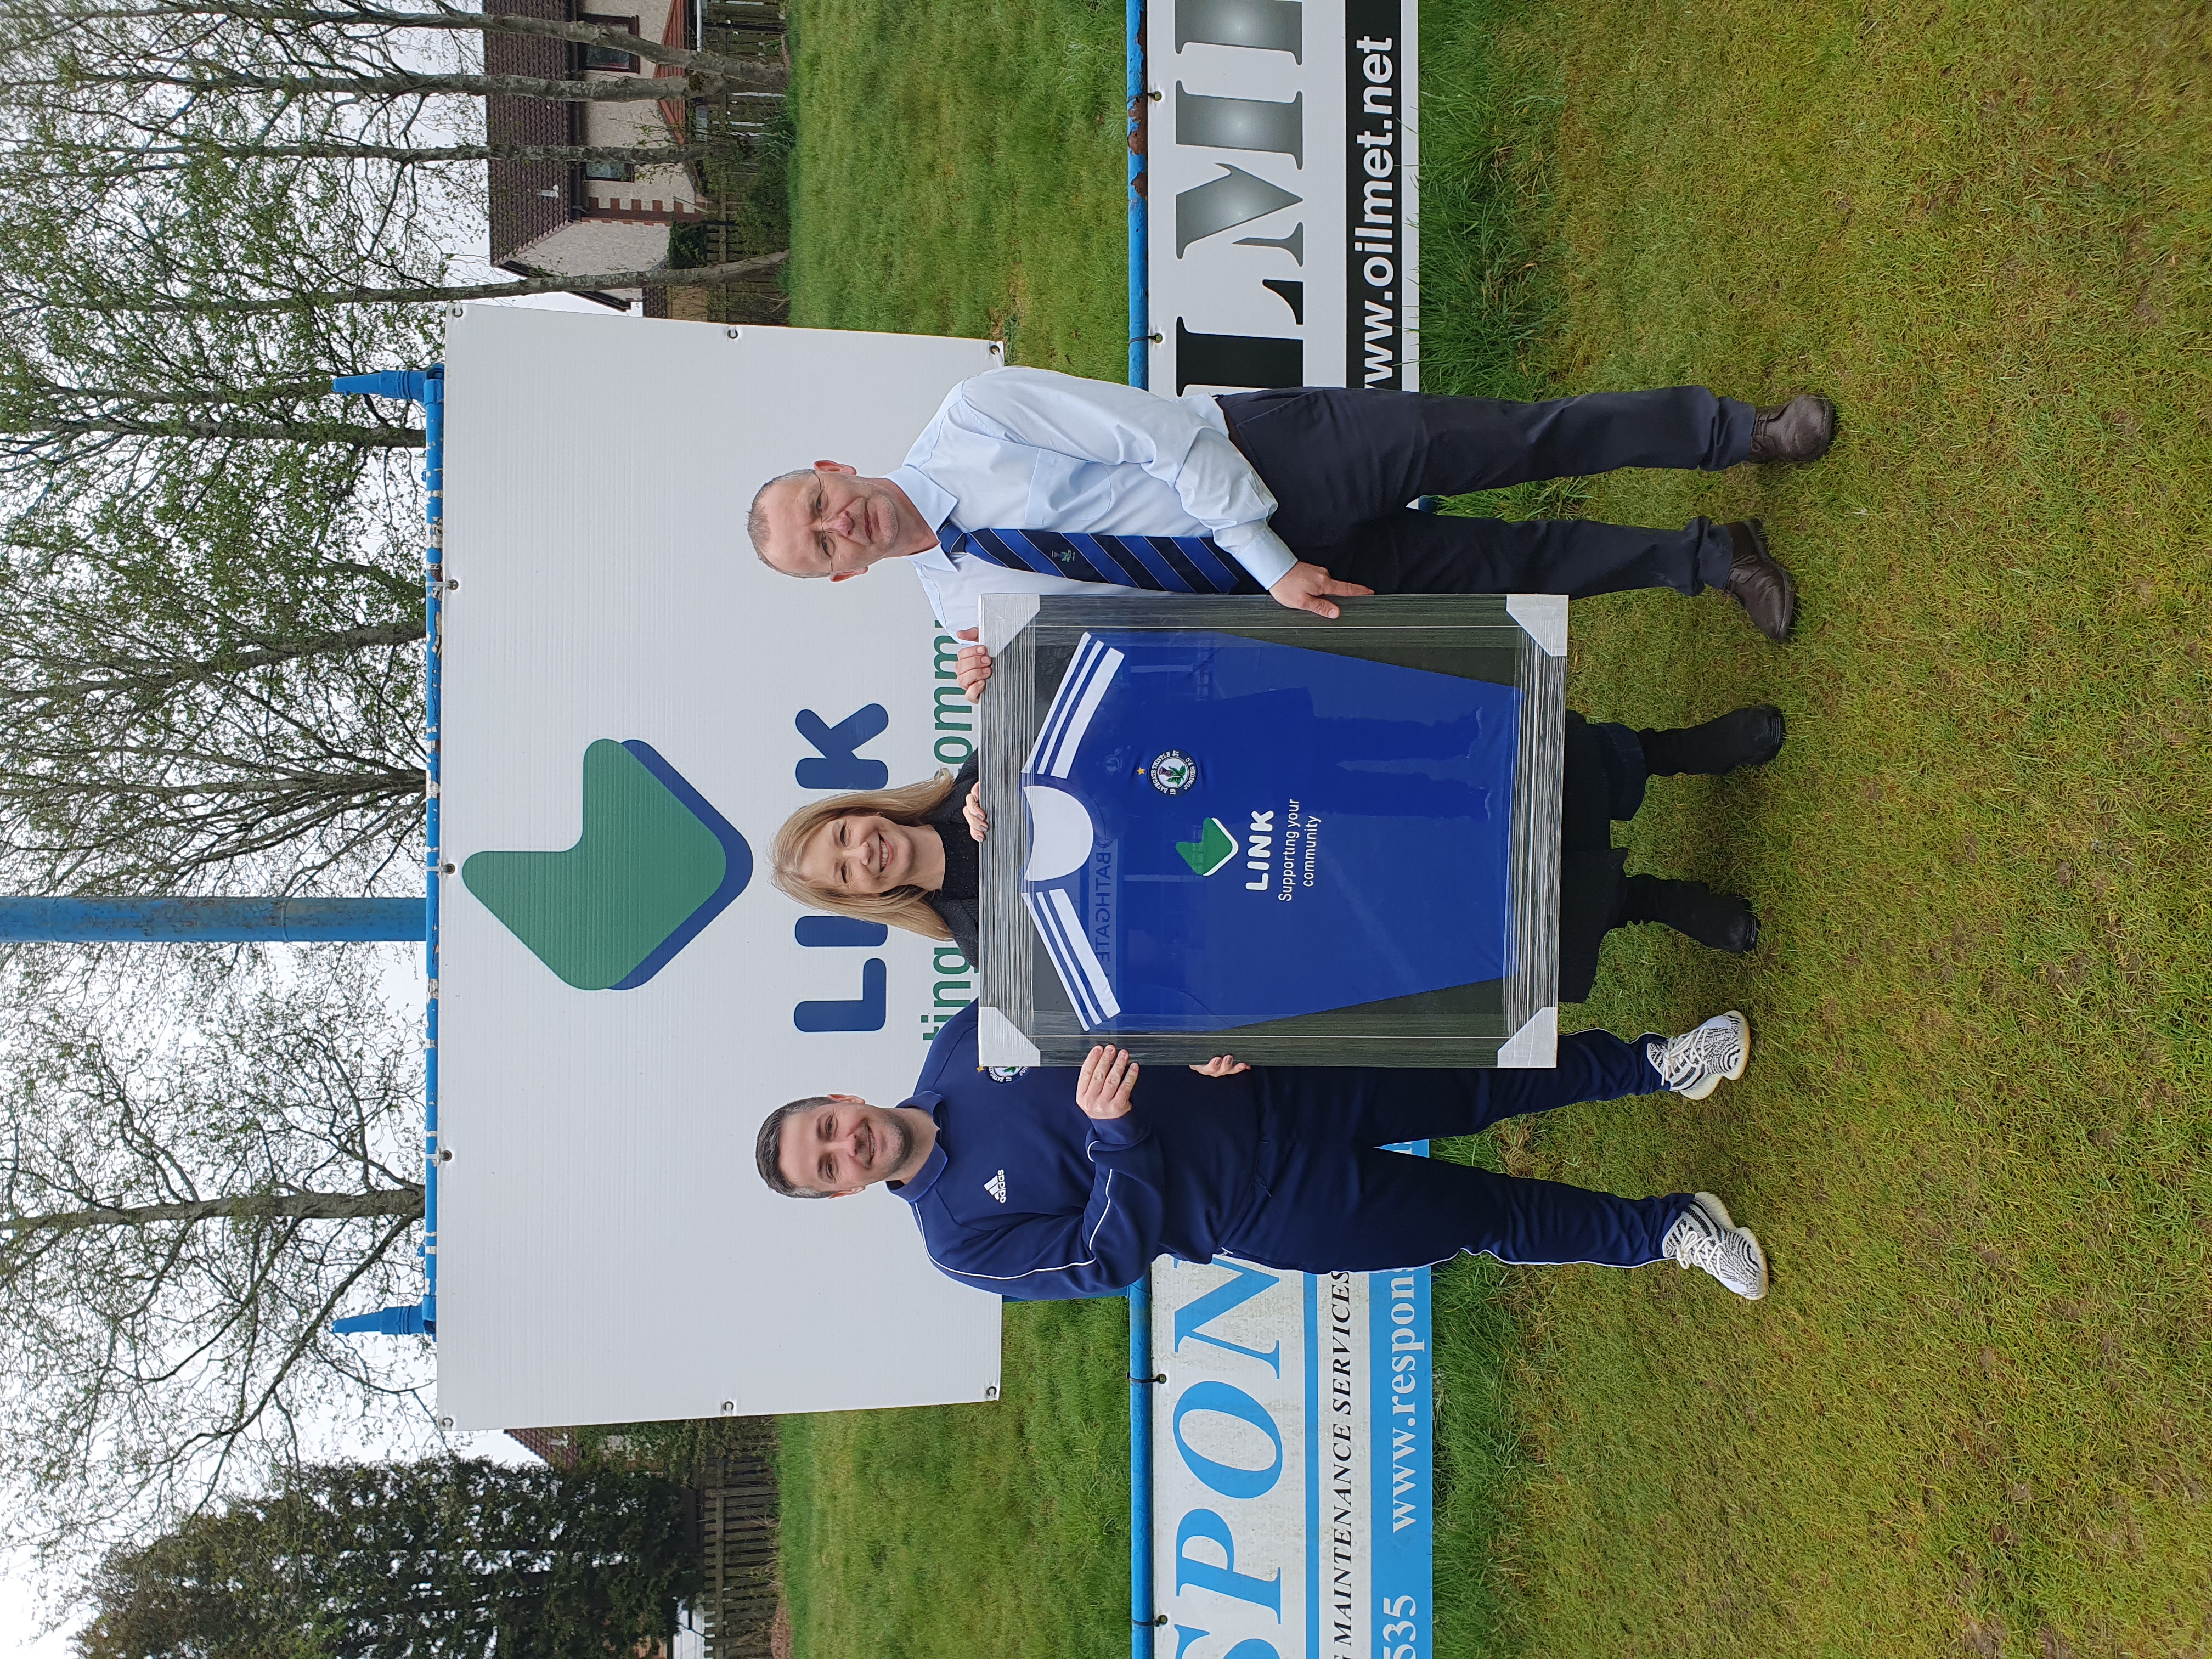 Link Group continues to support junior football club Bathgate Thistle